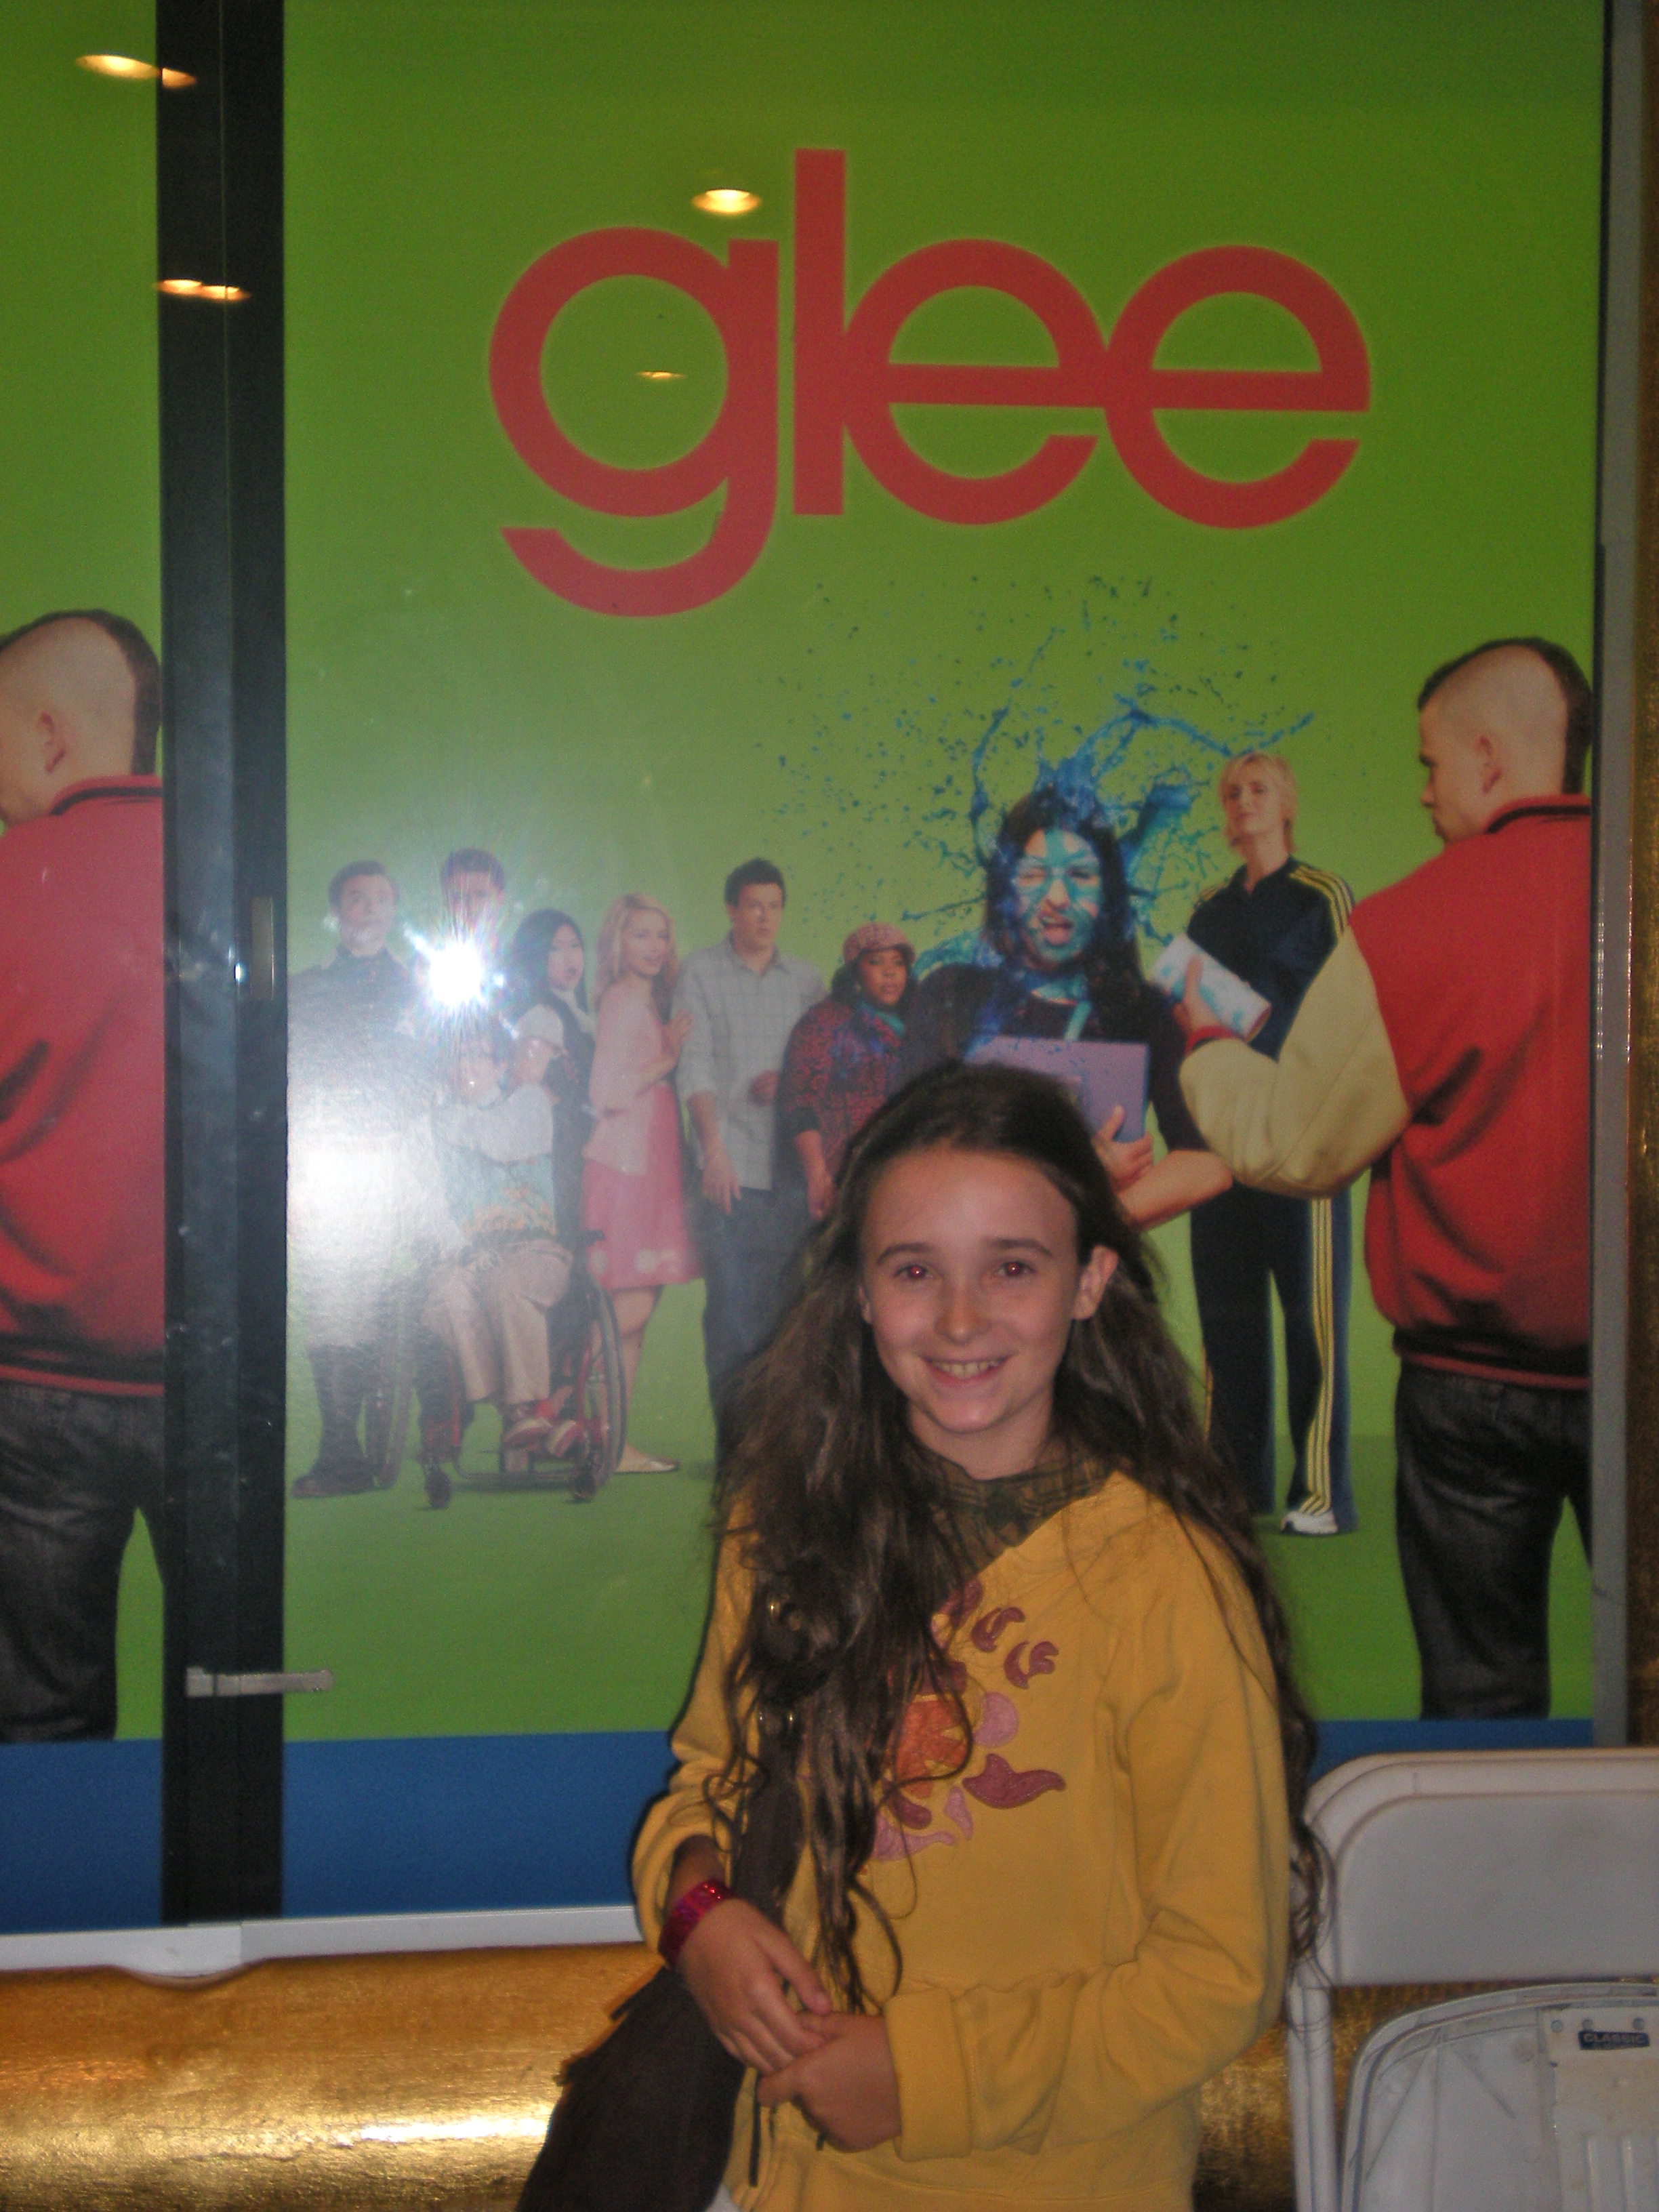 The Television Academy's special Glee concert!